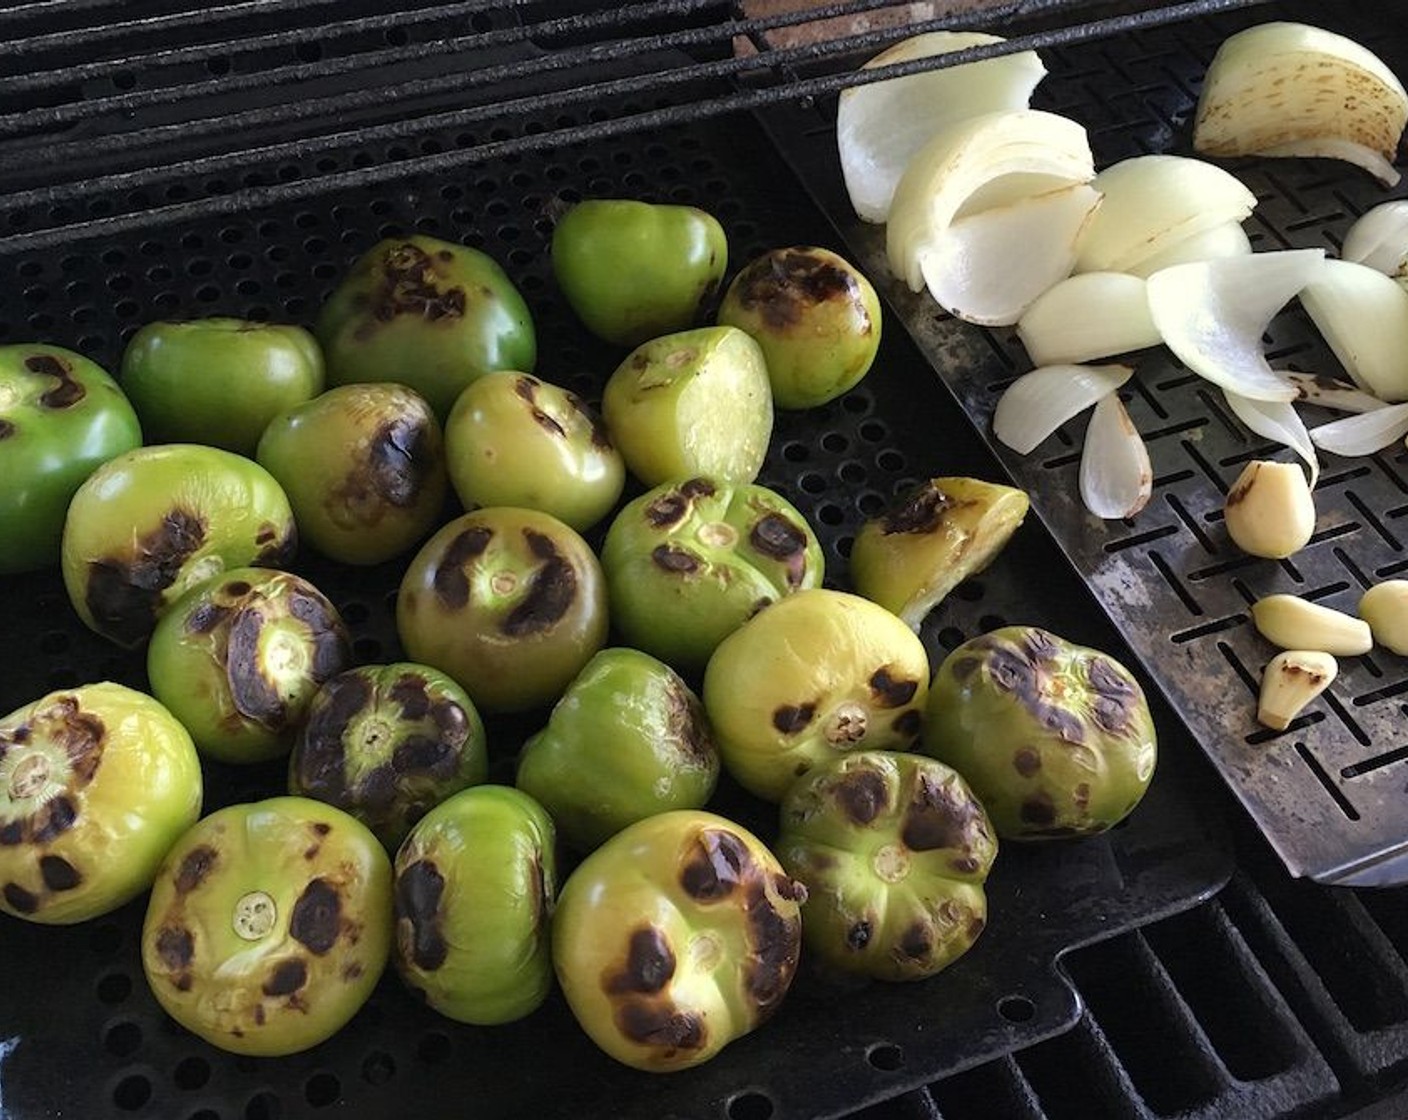 step 2 On a grill tray, grill the whole Tomatillos (3.5 lb), Onion (1) and Garlic (4 cloves) over medium heat until they soften and brown slightly.